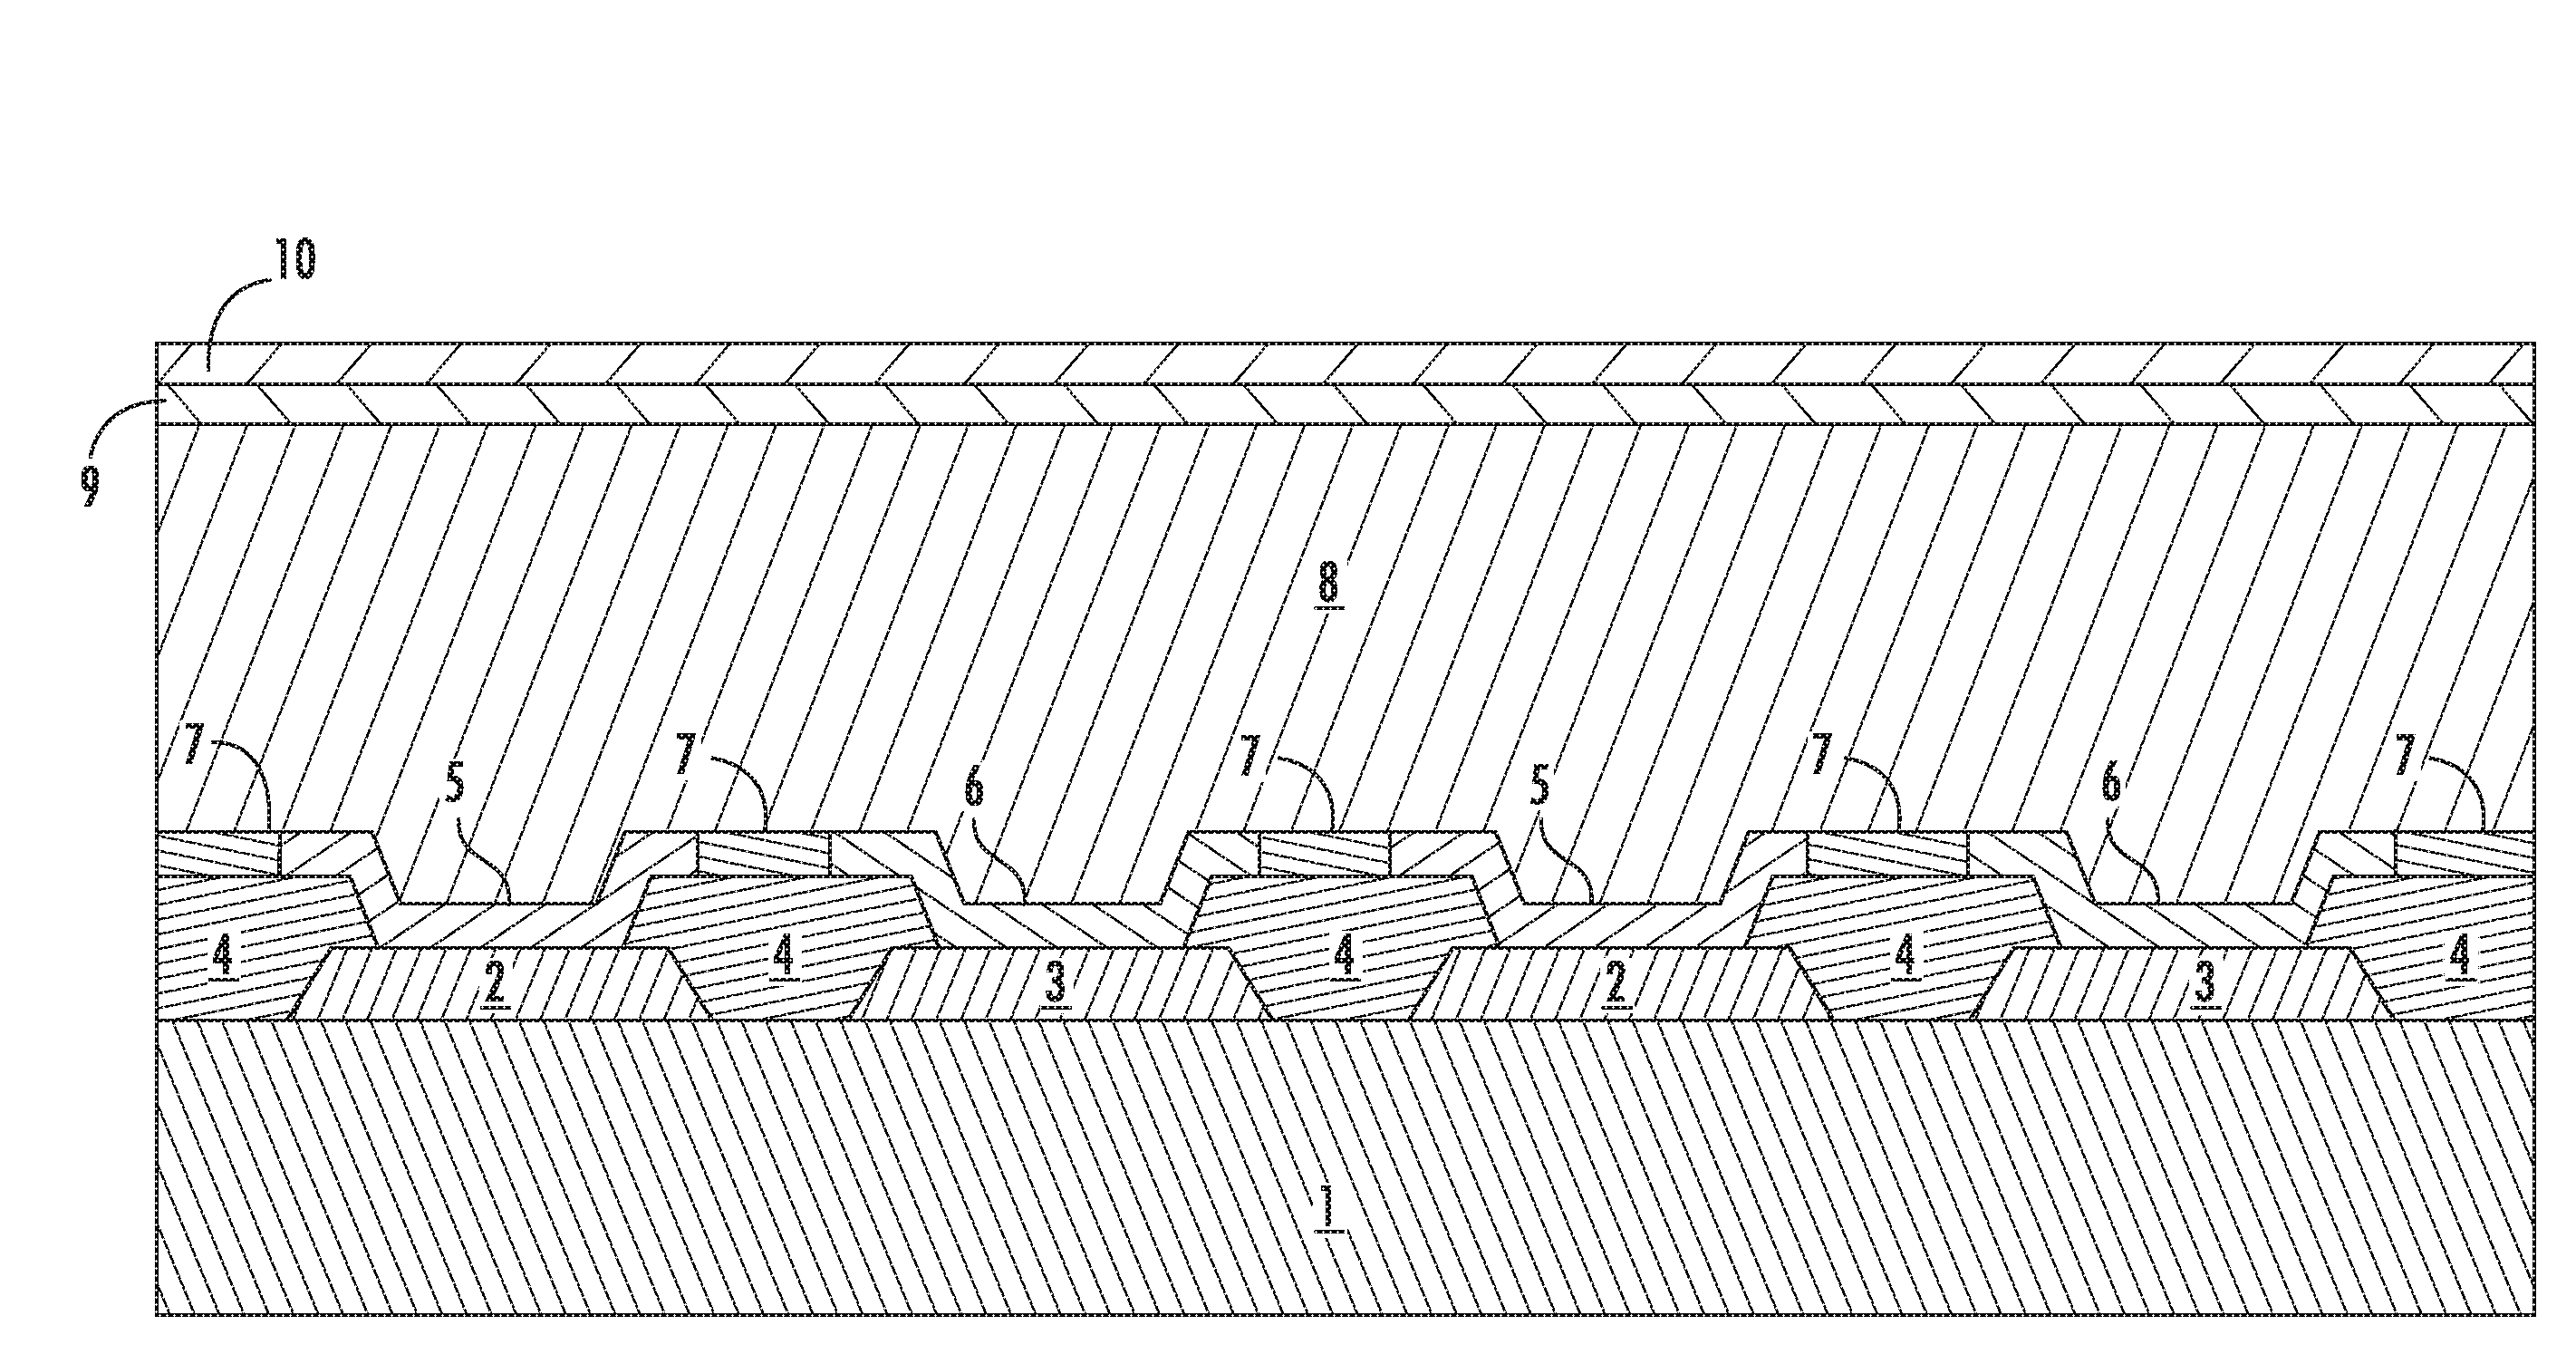 Modular interdigitated back contact photovoltaic cell structure on opaque substrate and fabrication process